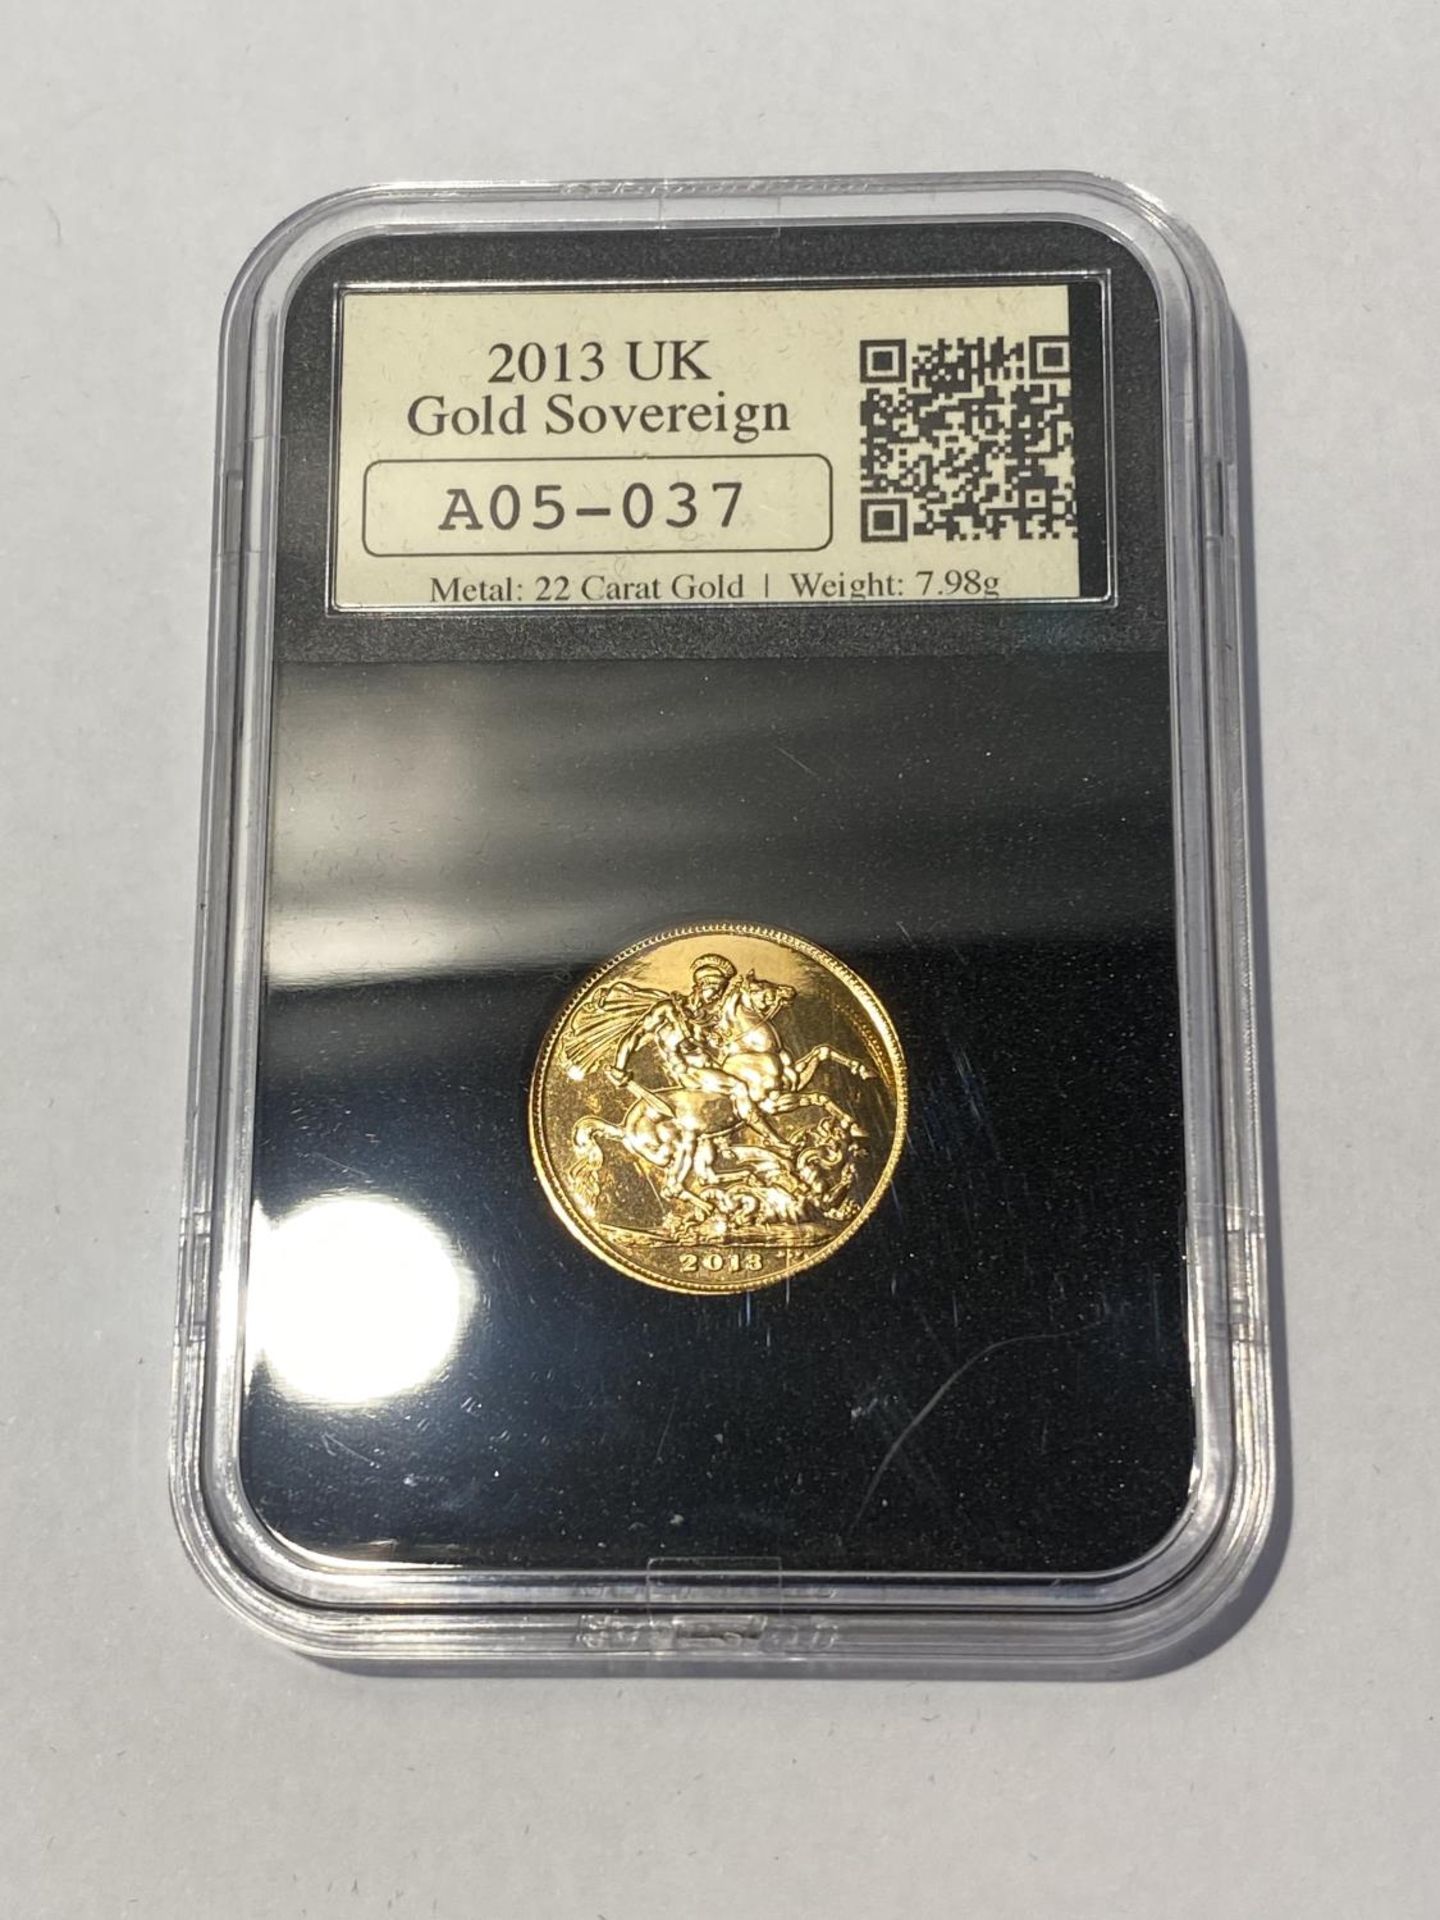 A UK GOLD SOVEREIGN, HALF SOVEREIGN AND QUARTER SOVEREIGN, QUEEN ELIZABETH 11, 2013, NEATLY - Image 2 of 6